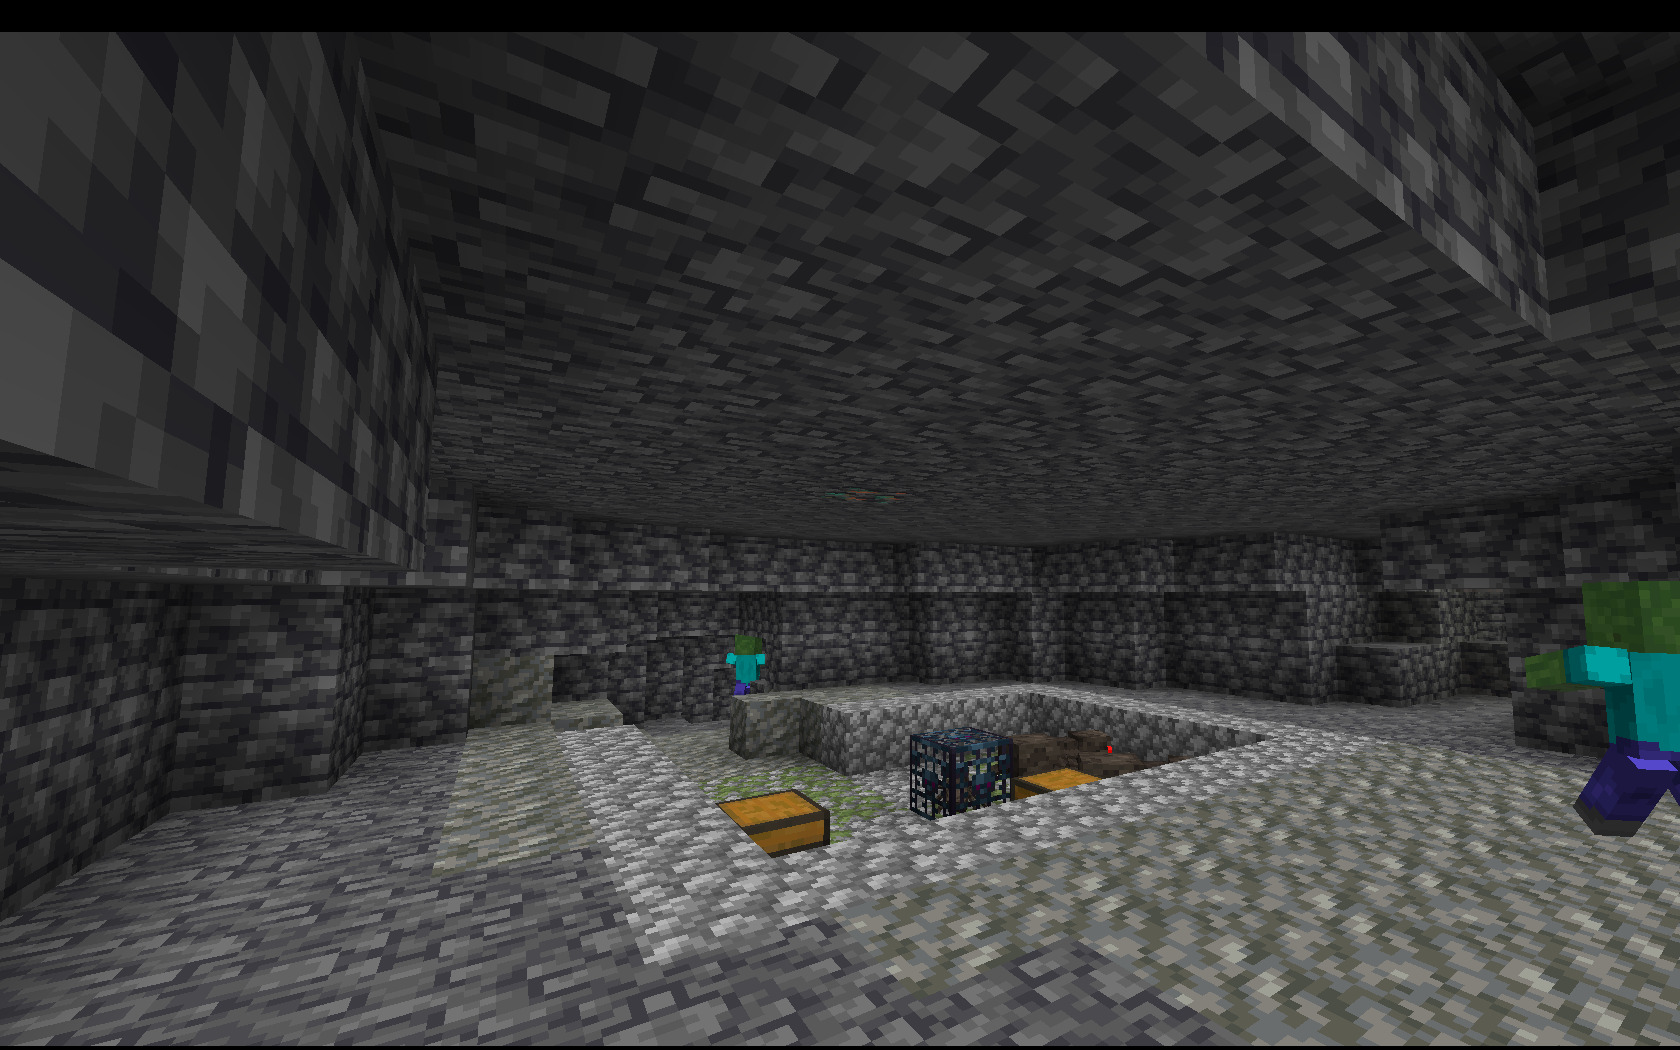 A screenshot of a Zombie dungeon in Minecraft